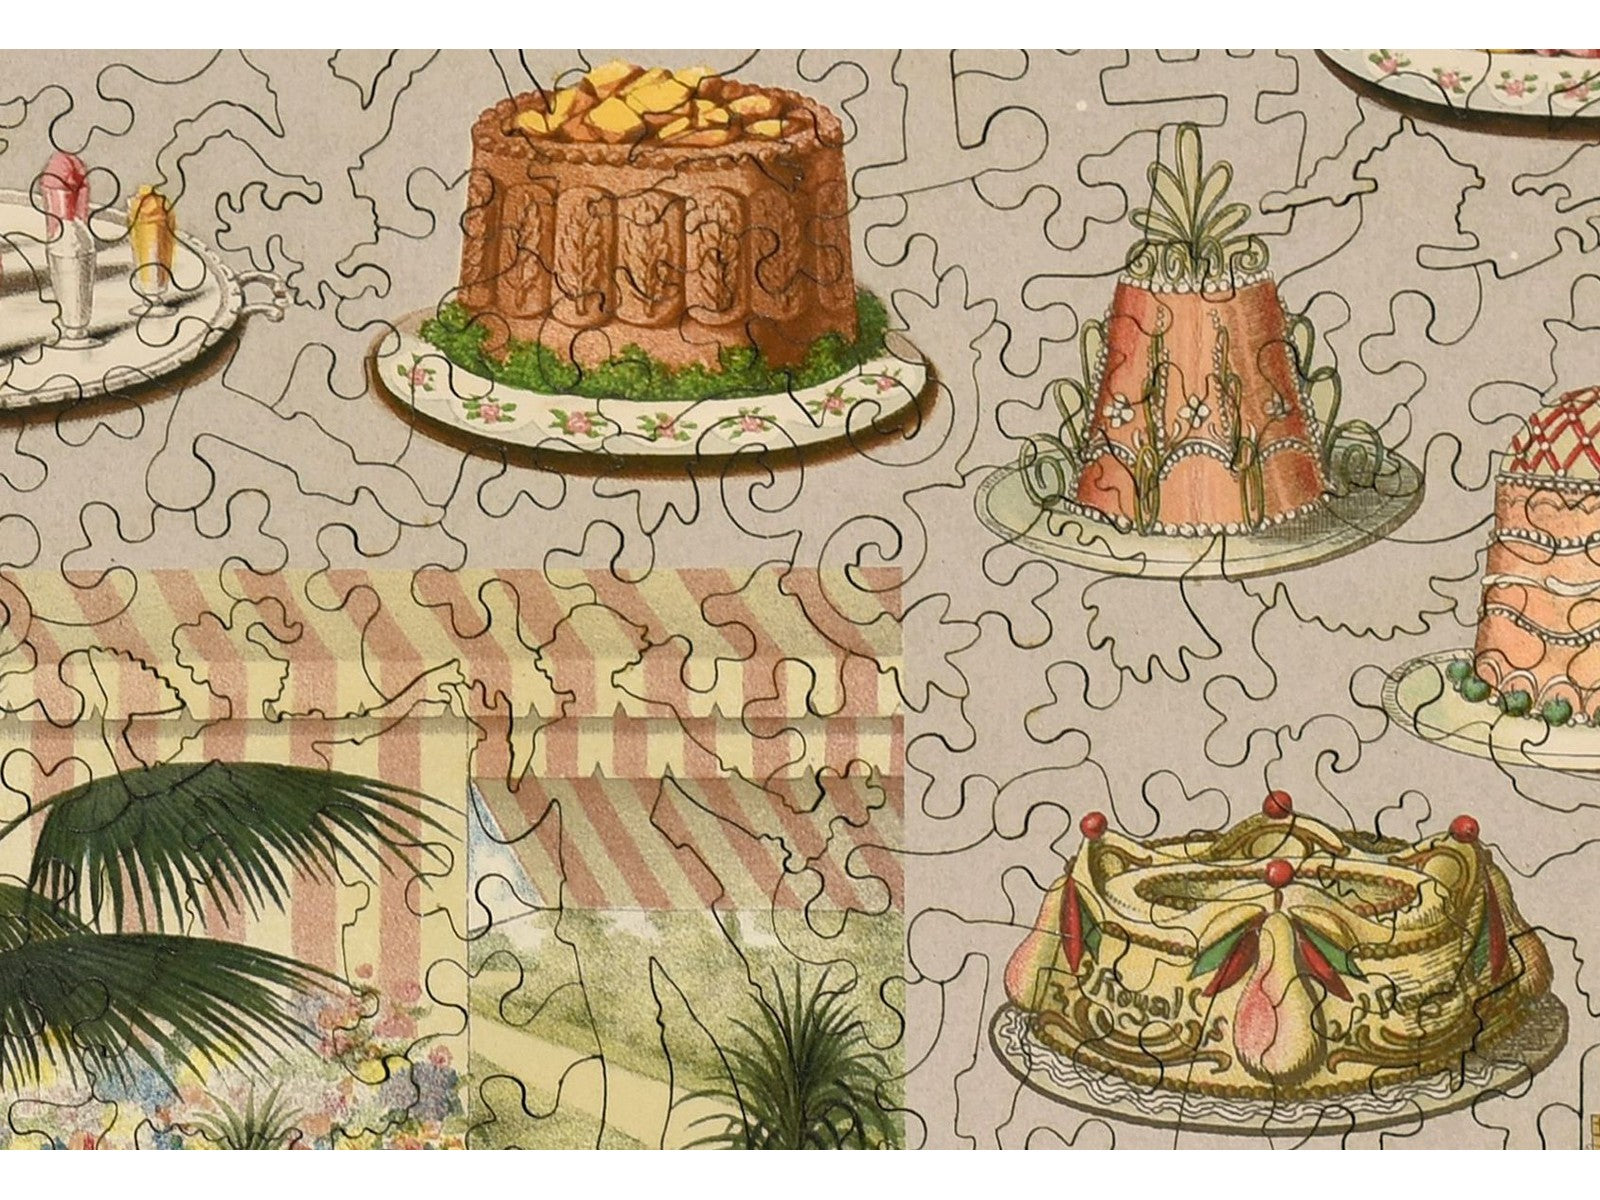 A closeup of the front of the puzzle, Fancy Cakes, showing the detail in the pieces.